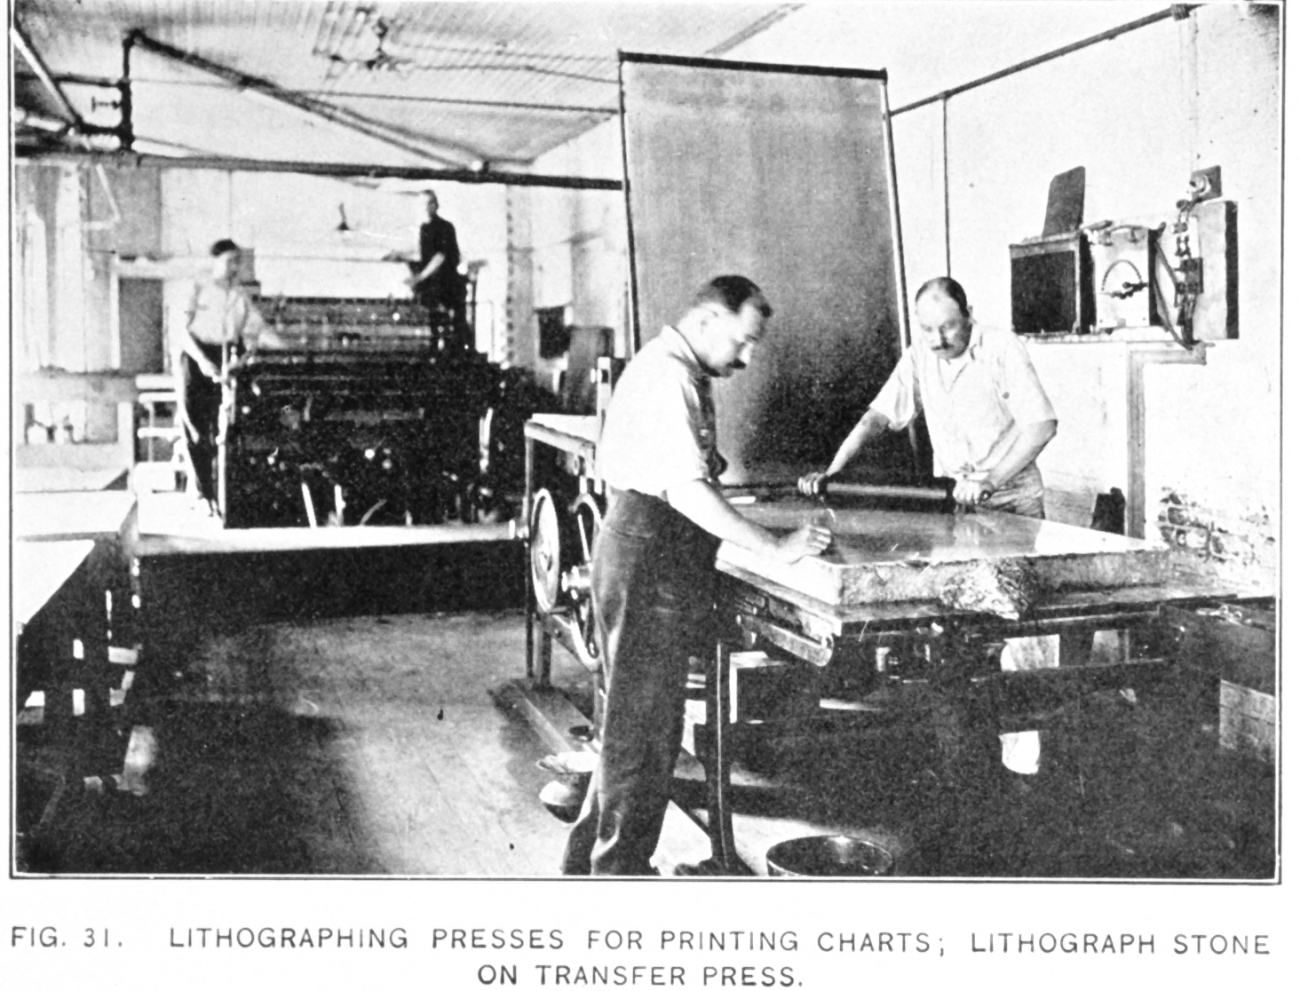 Lithographing presses for printing charts; lithograph stone on transfer press